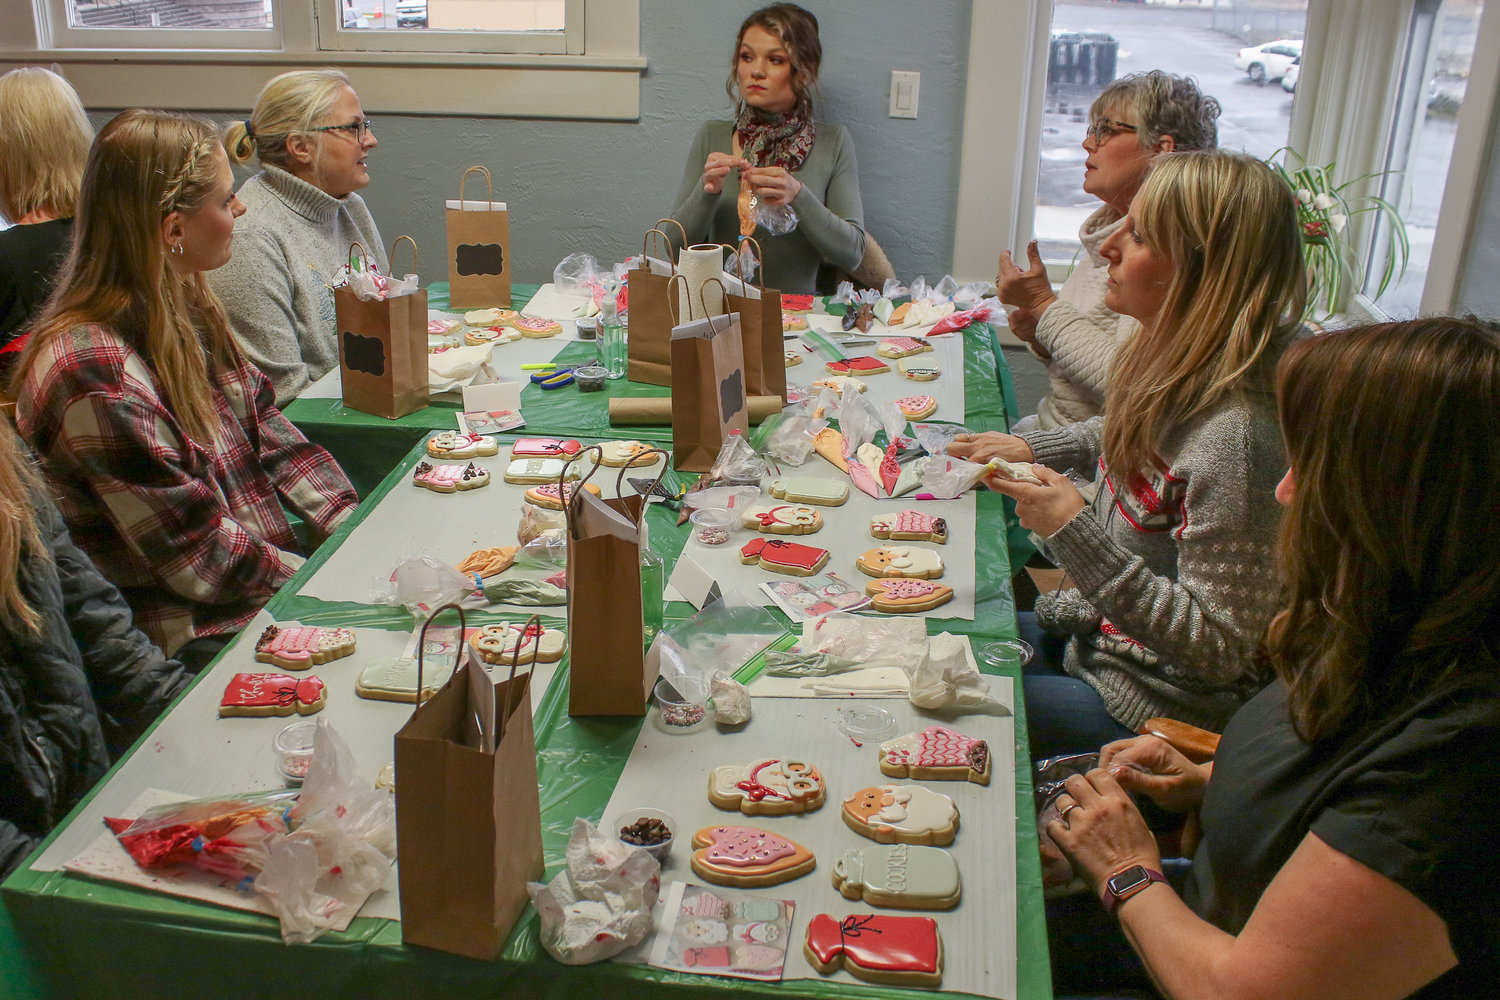 Lewis County locals finish up decorating sugar cookies during a royal icing decorating class taught by Anna Martin from Rochester. Martin owns her own baking company, Anna's Bakery.